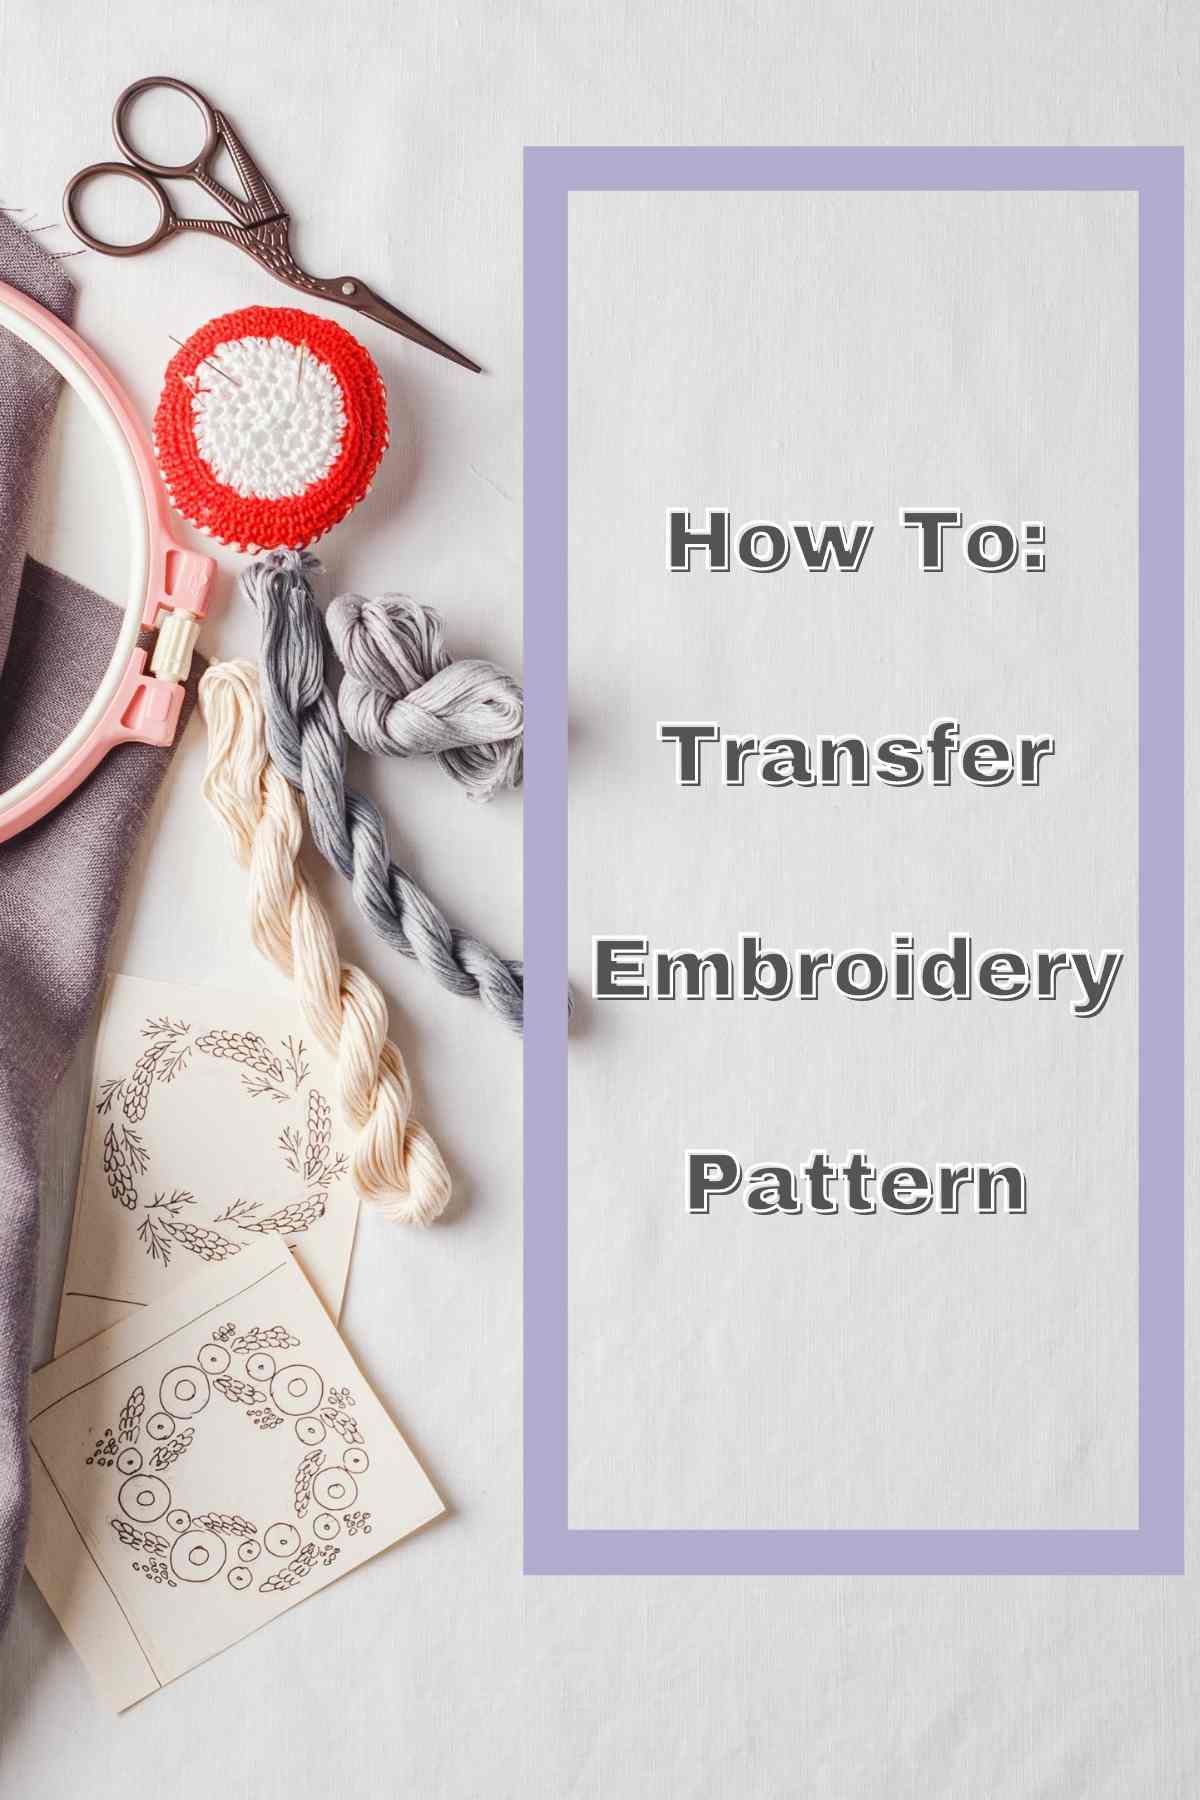 How to transfer embroidery pattern